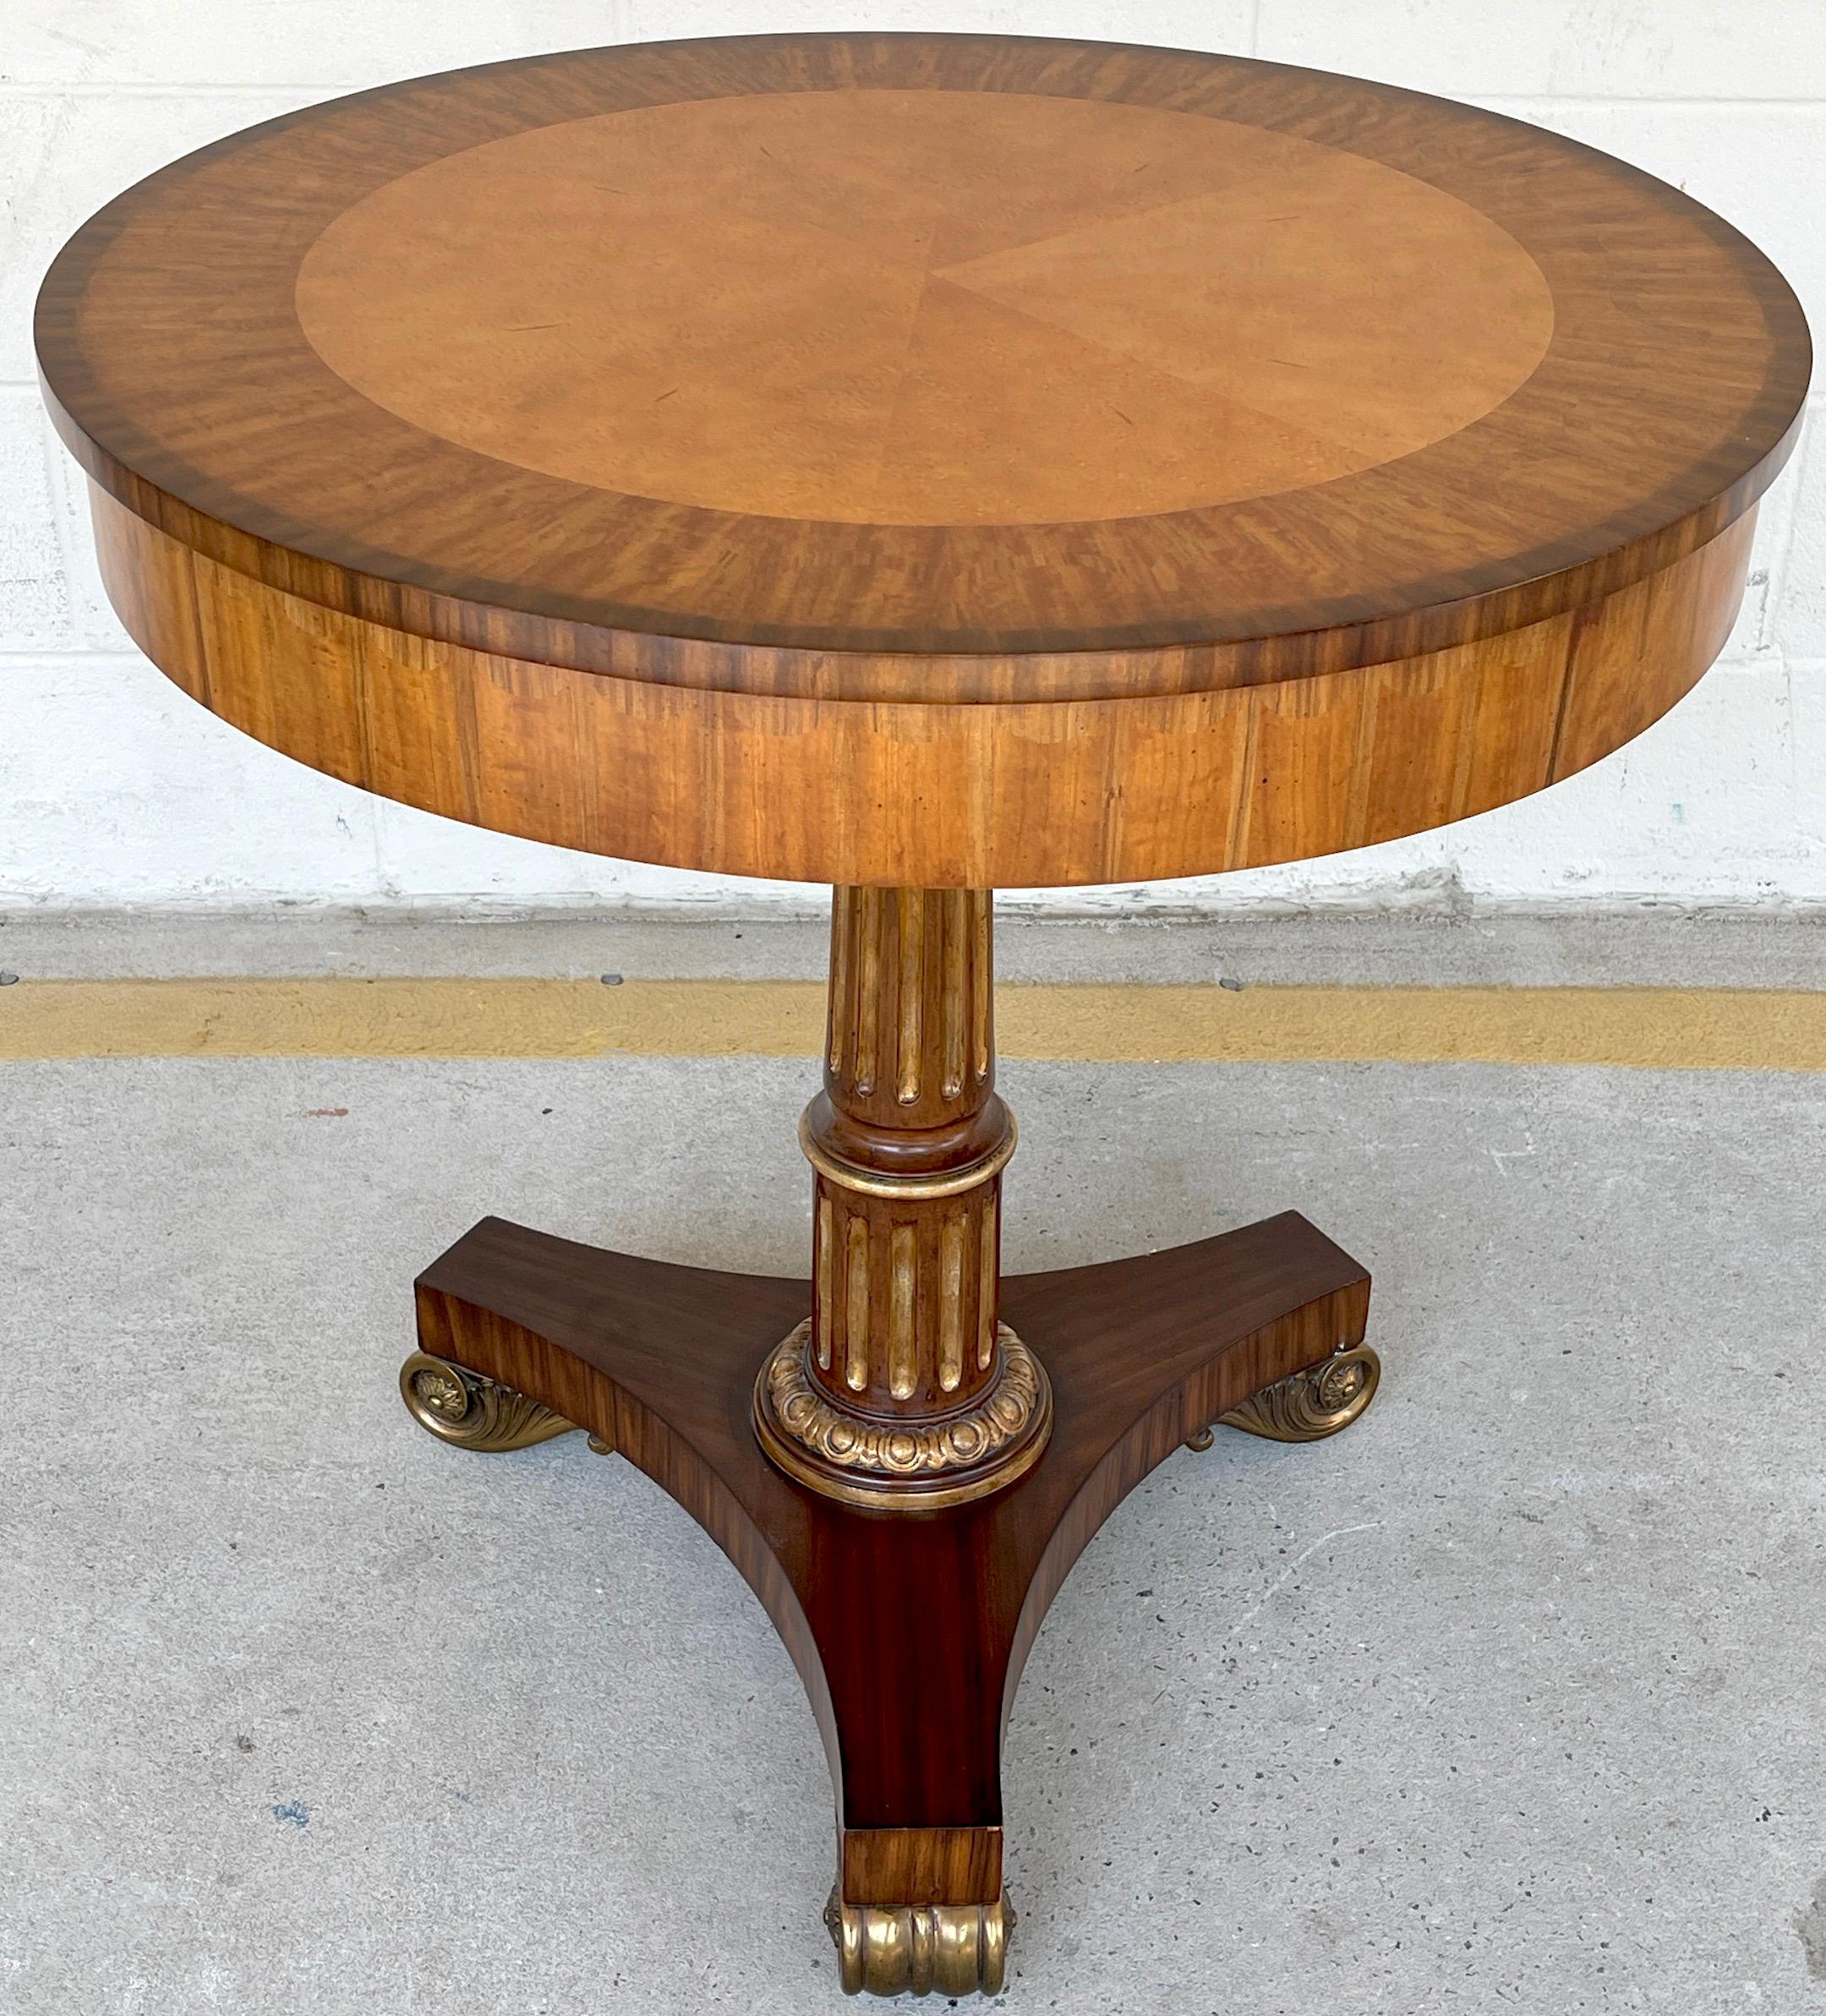 Neoclassical style inlaid side table with bronze feet, by Maitland-Smith, Of circular form with Fine inlays of burl and satinwood, raised on a reeded mahogany parcel gilt column on a bronze footed triparte base.